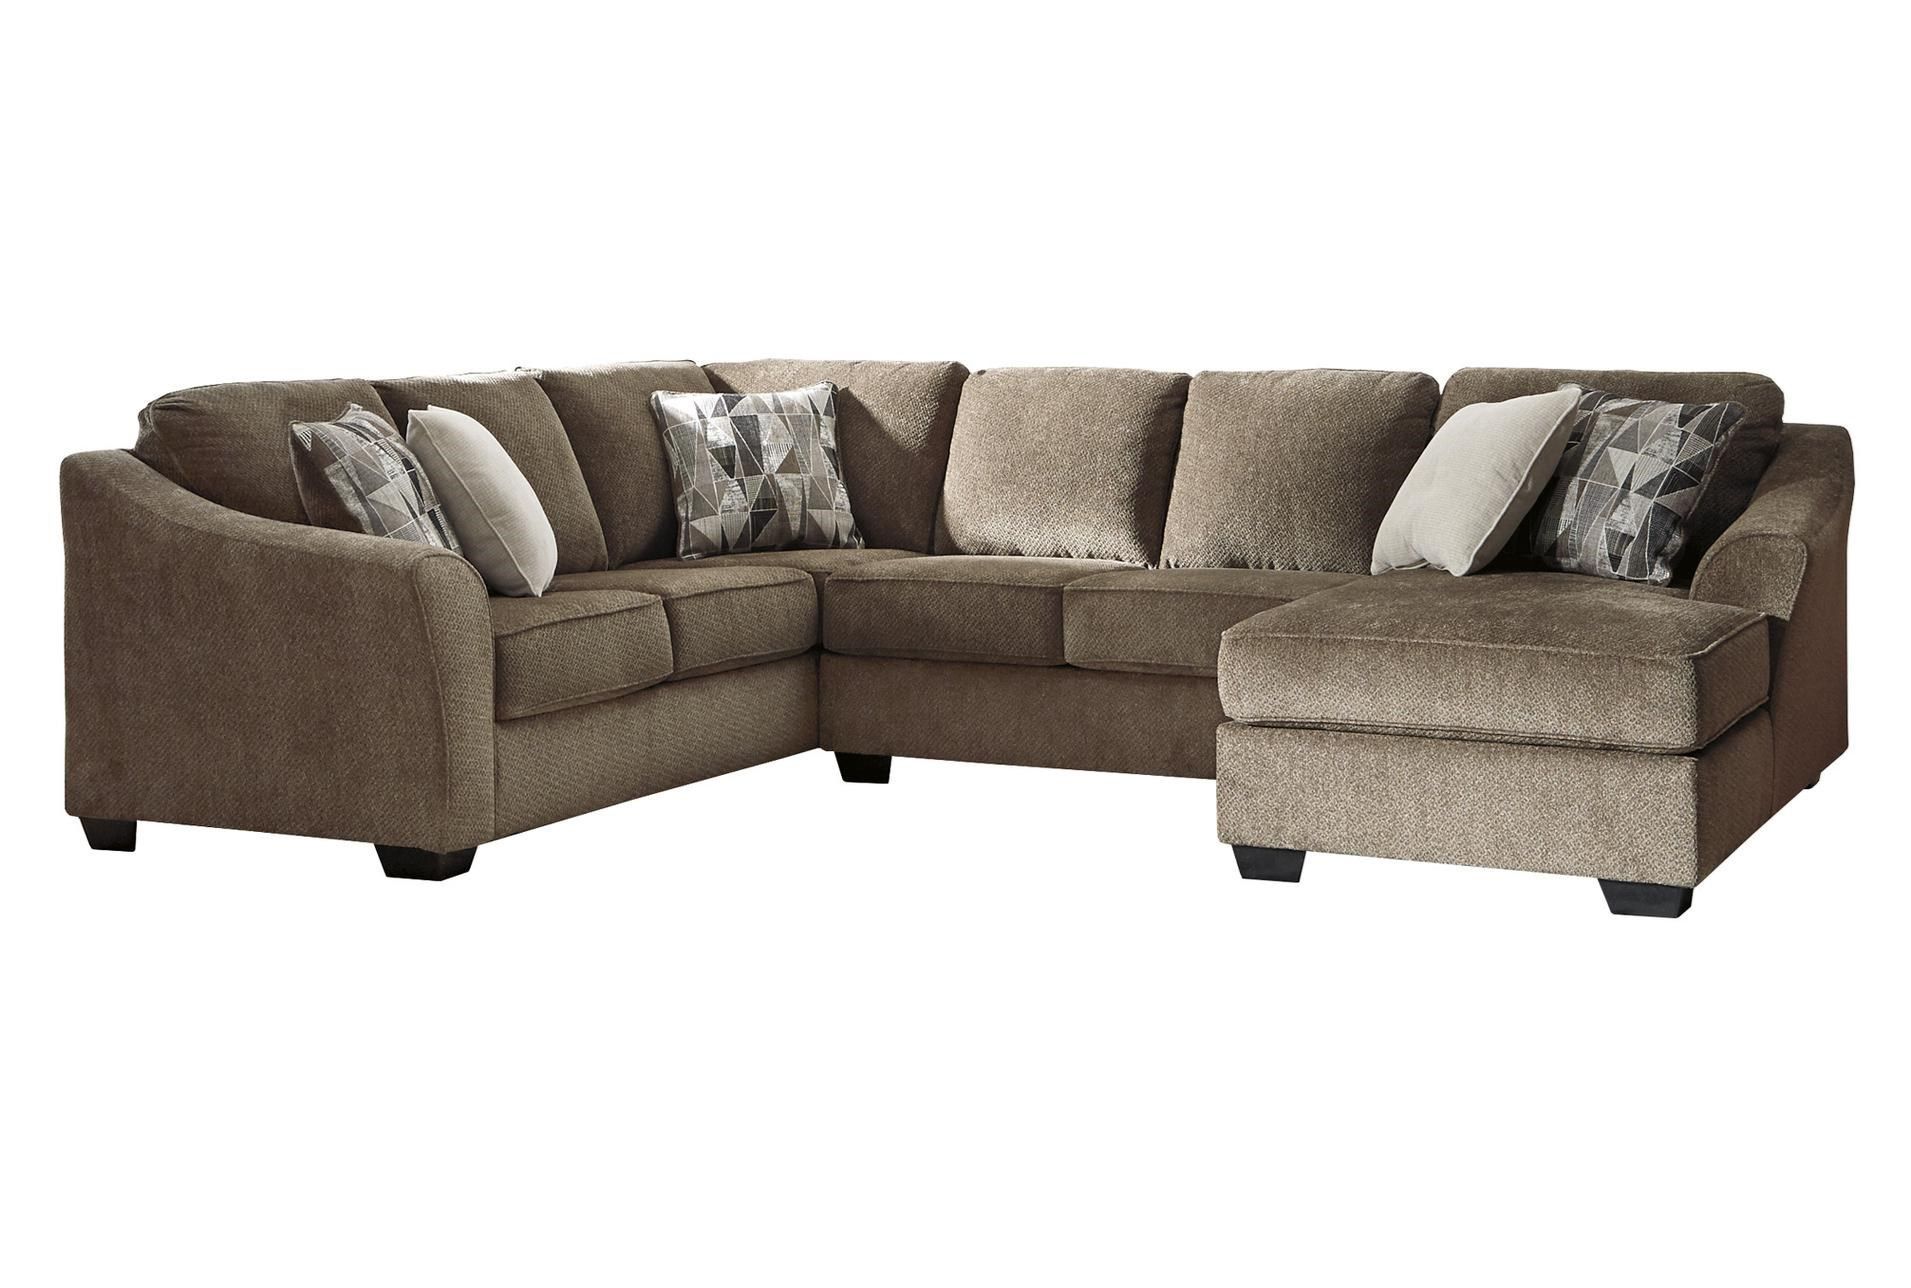 Graftin Teak 3 Piece 130" Sectional With Right Arm Facing Chaise | 3 Regarding 130" Curved Sectionals (View 7 of 20)